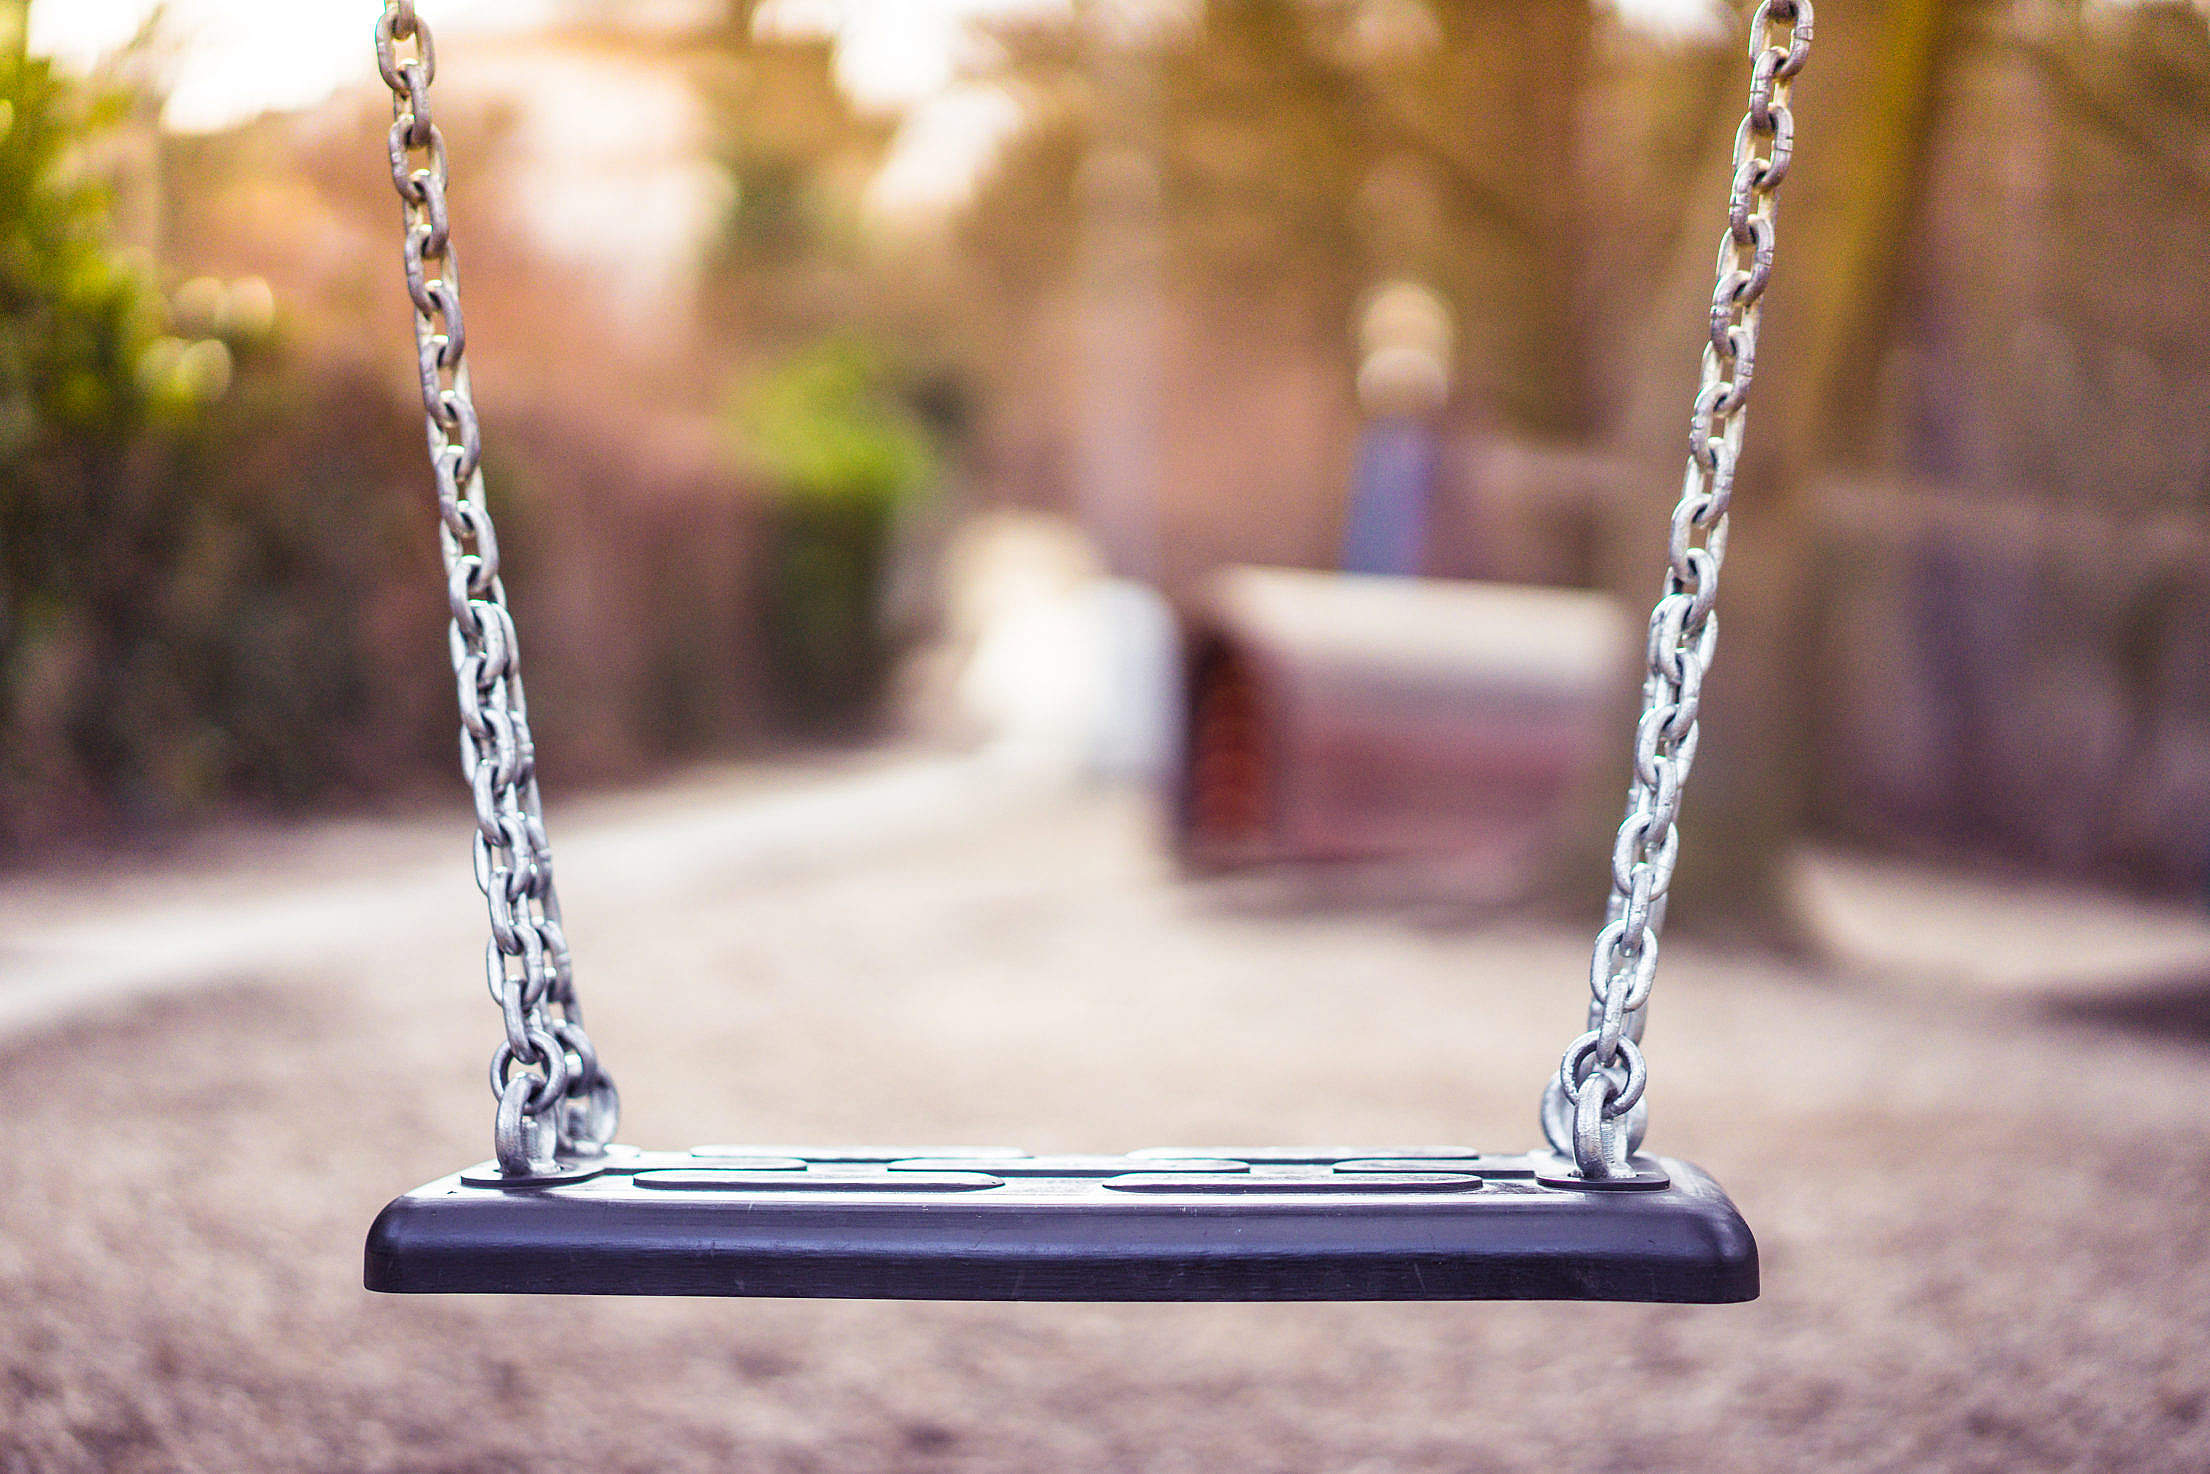 Swing For Kids in City Park Playground Free Stock Photo